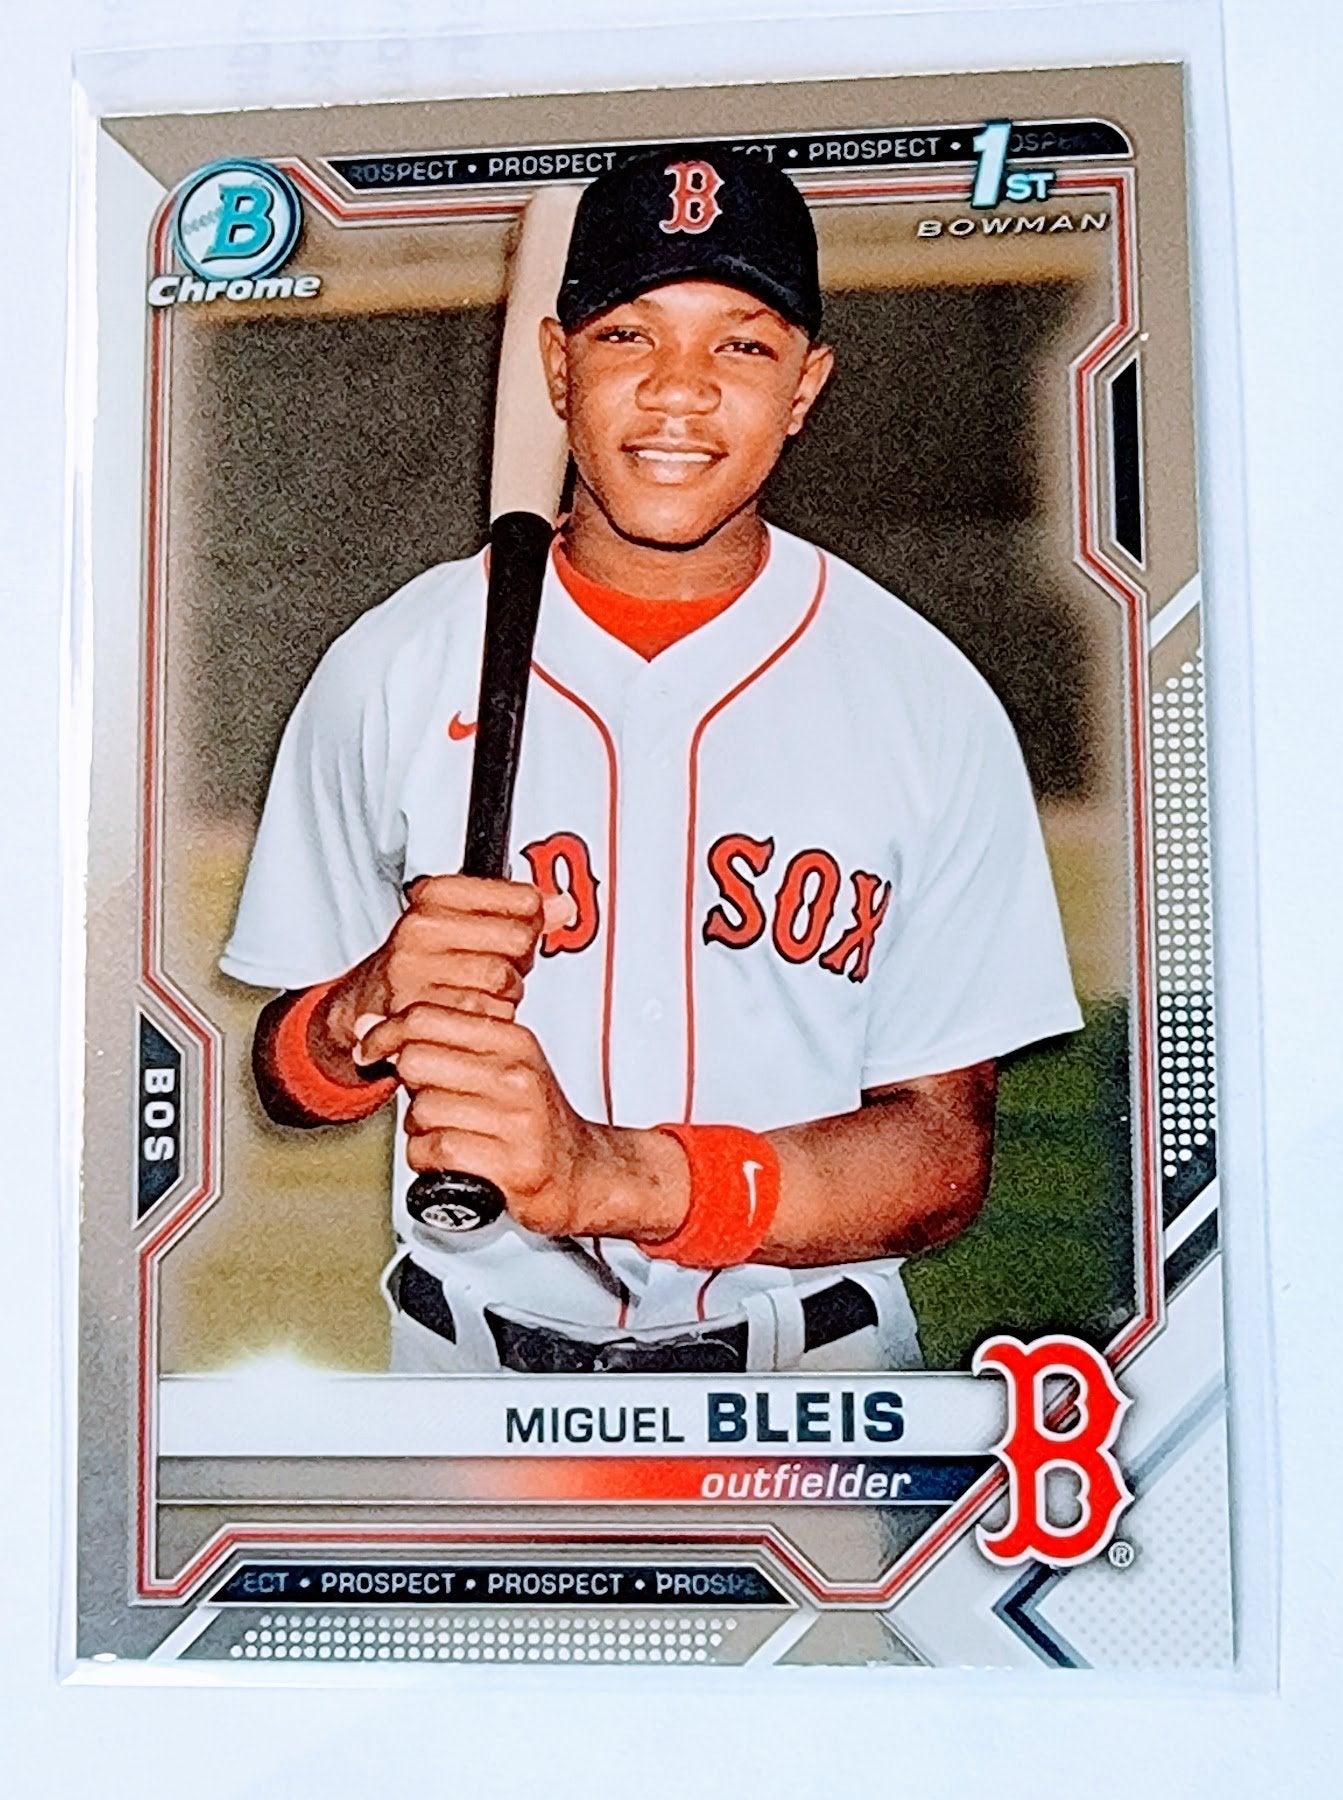 2021 Bowman Chrome Miguel Bleis 1st on Bowman Prospect Baseball Card SMCB1 simple Xclusive Collectibles   